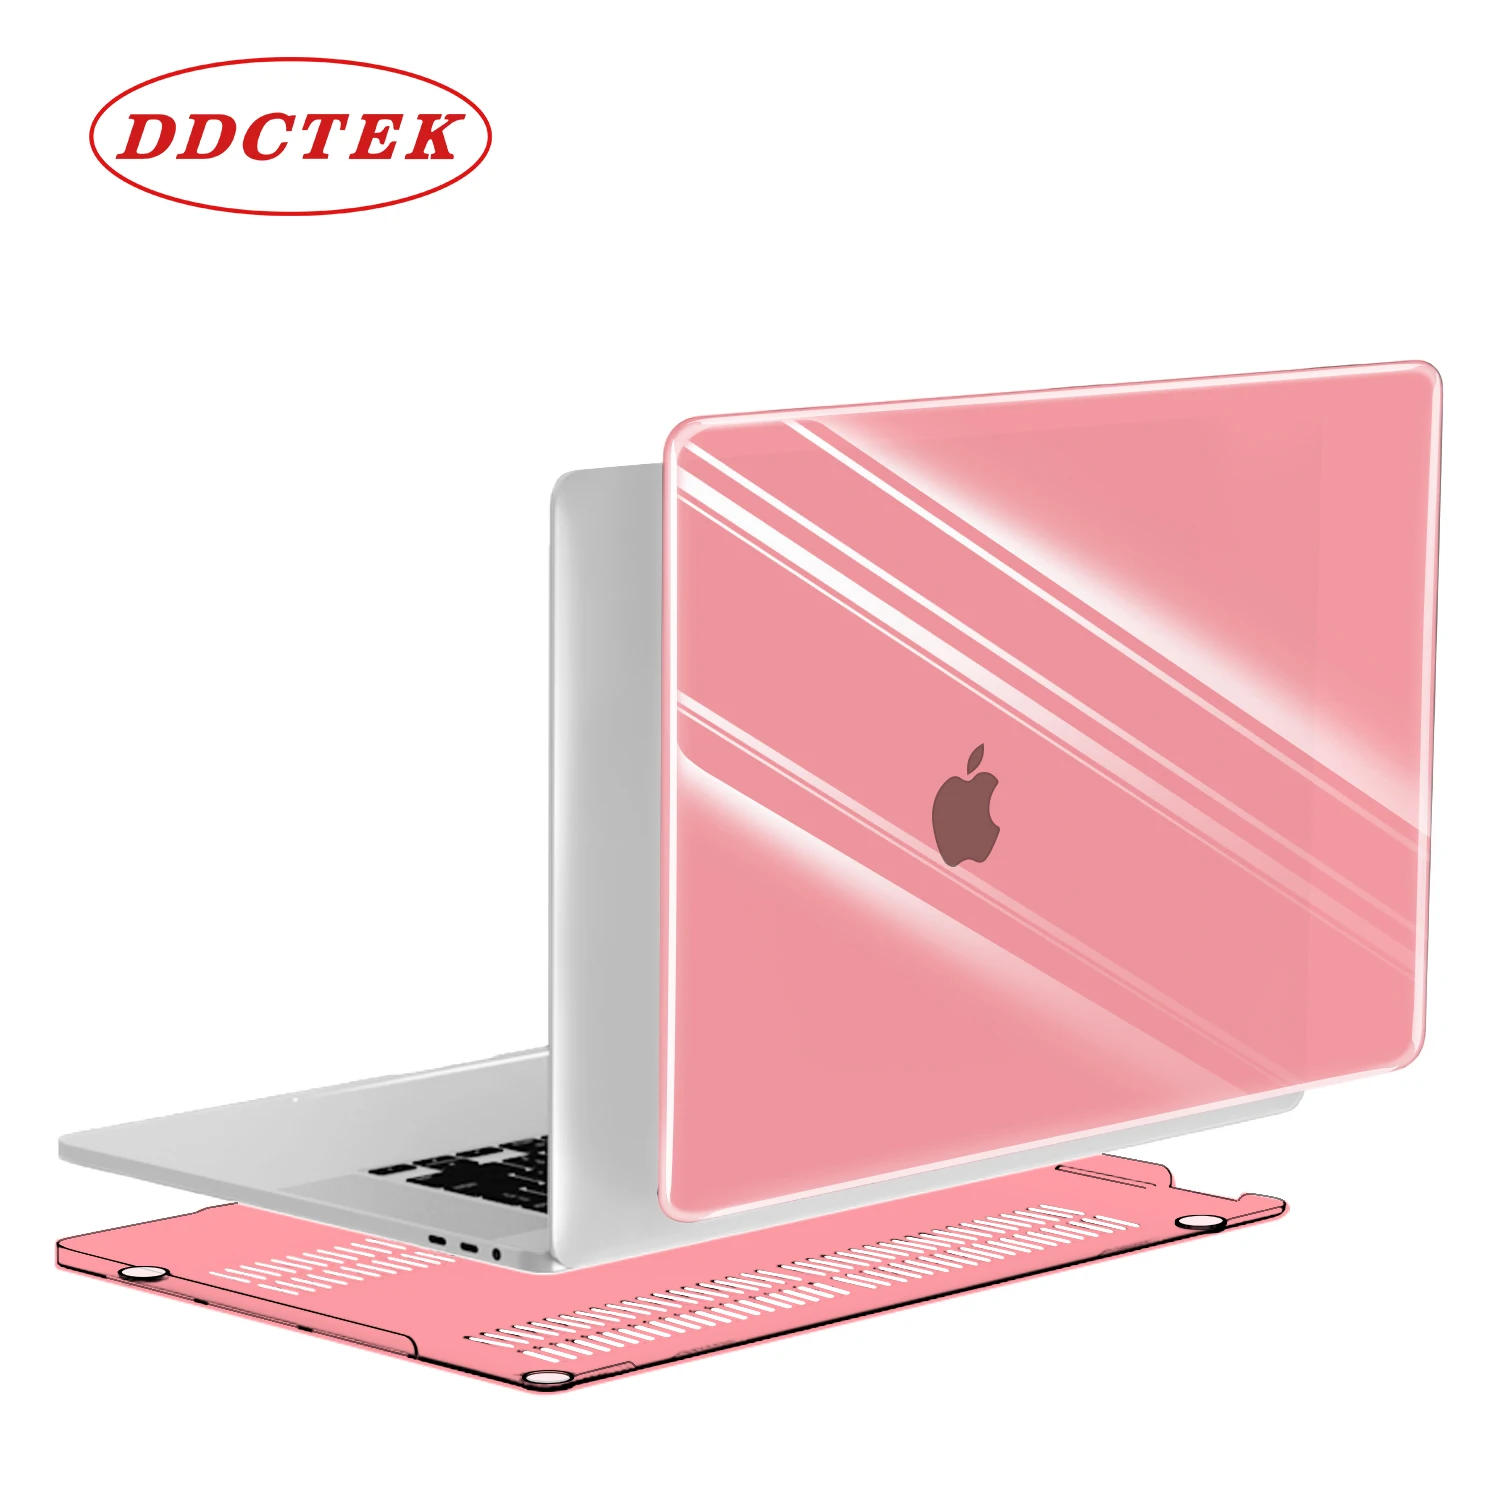 New Hard Plastic Shell Case Cover for Macbook Air 11/13 Pro 13/15 Retina 12 inch 